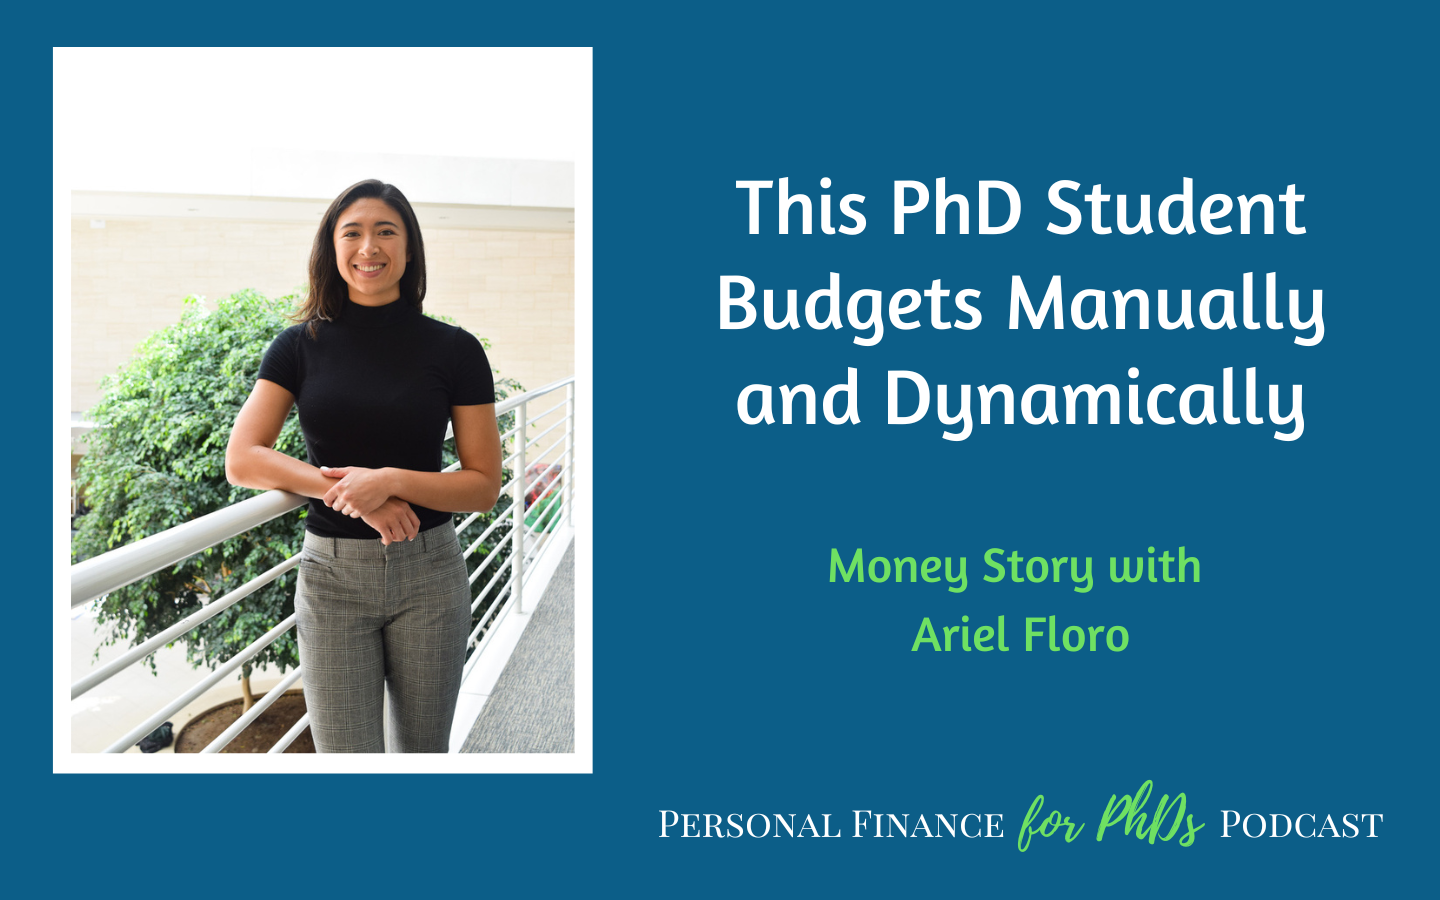 Image for PF for PhDs S14E11: This PhD Student Budgets Manually and Dynamically